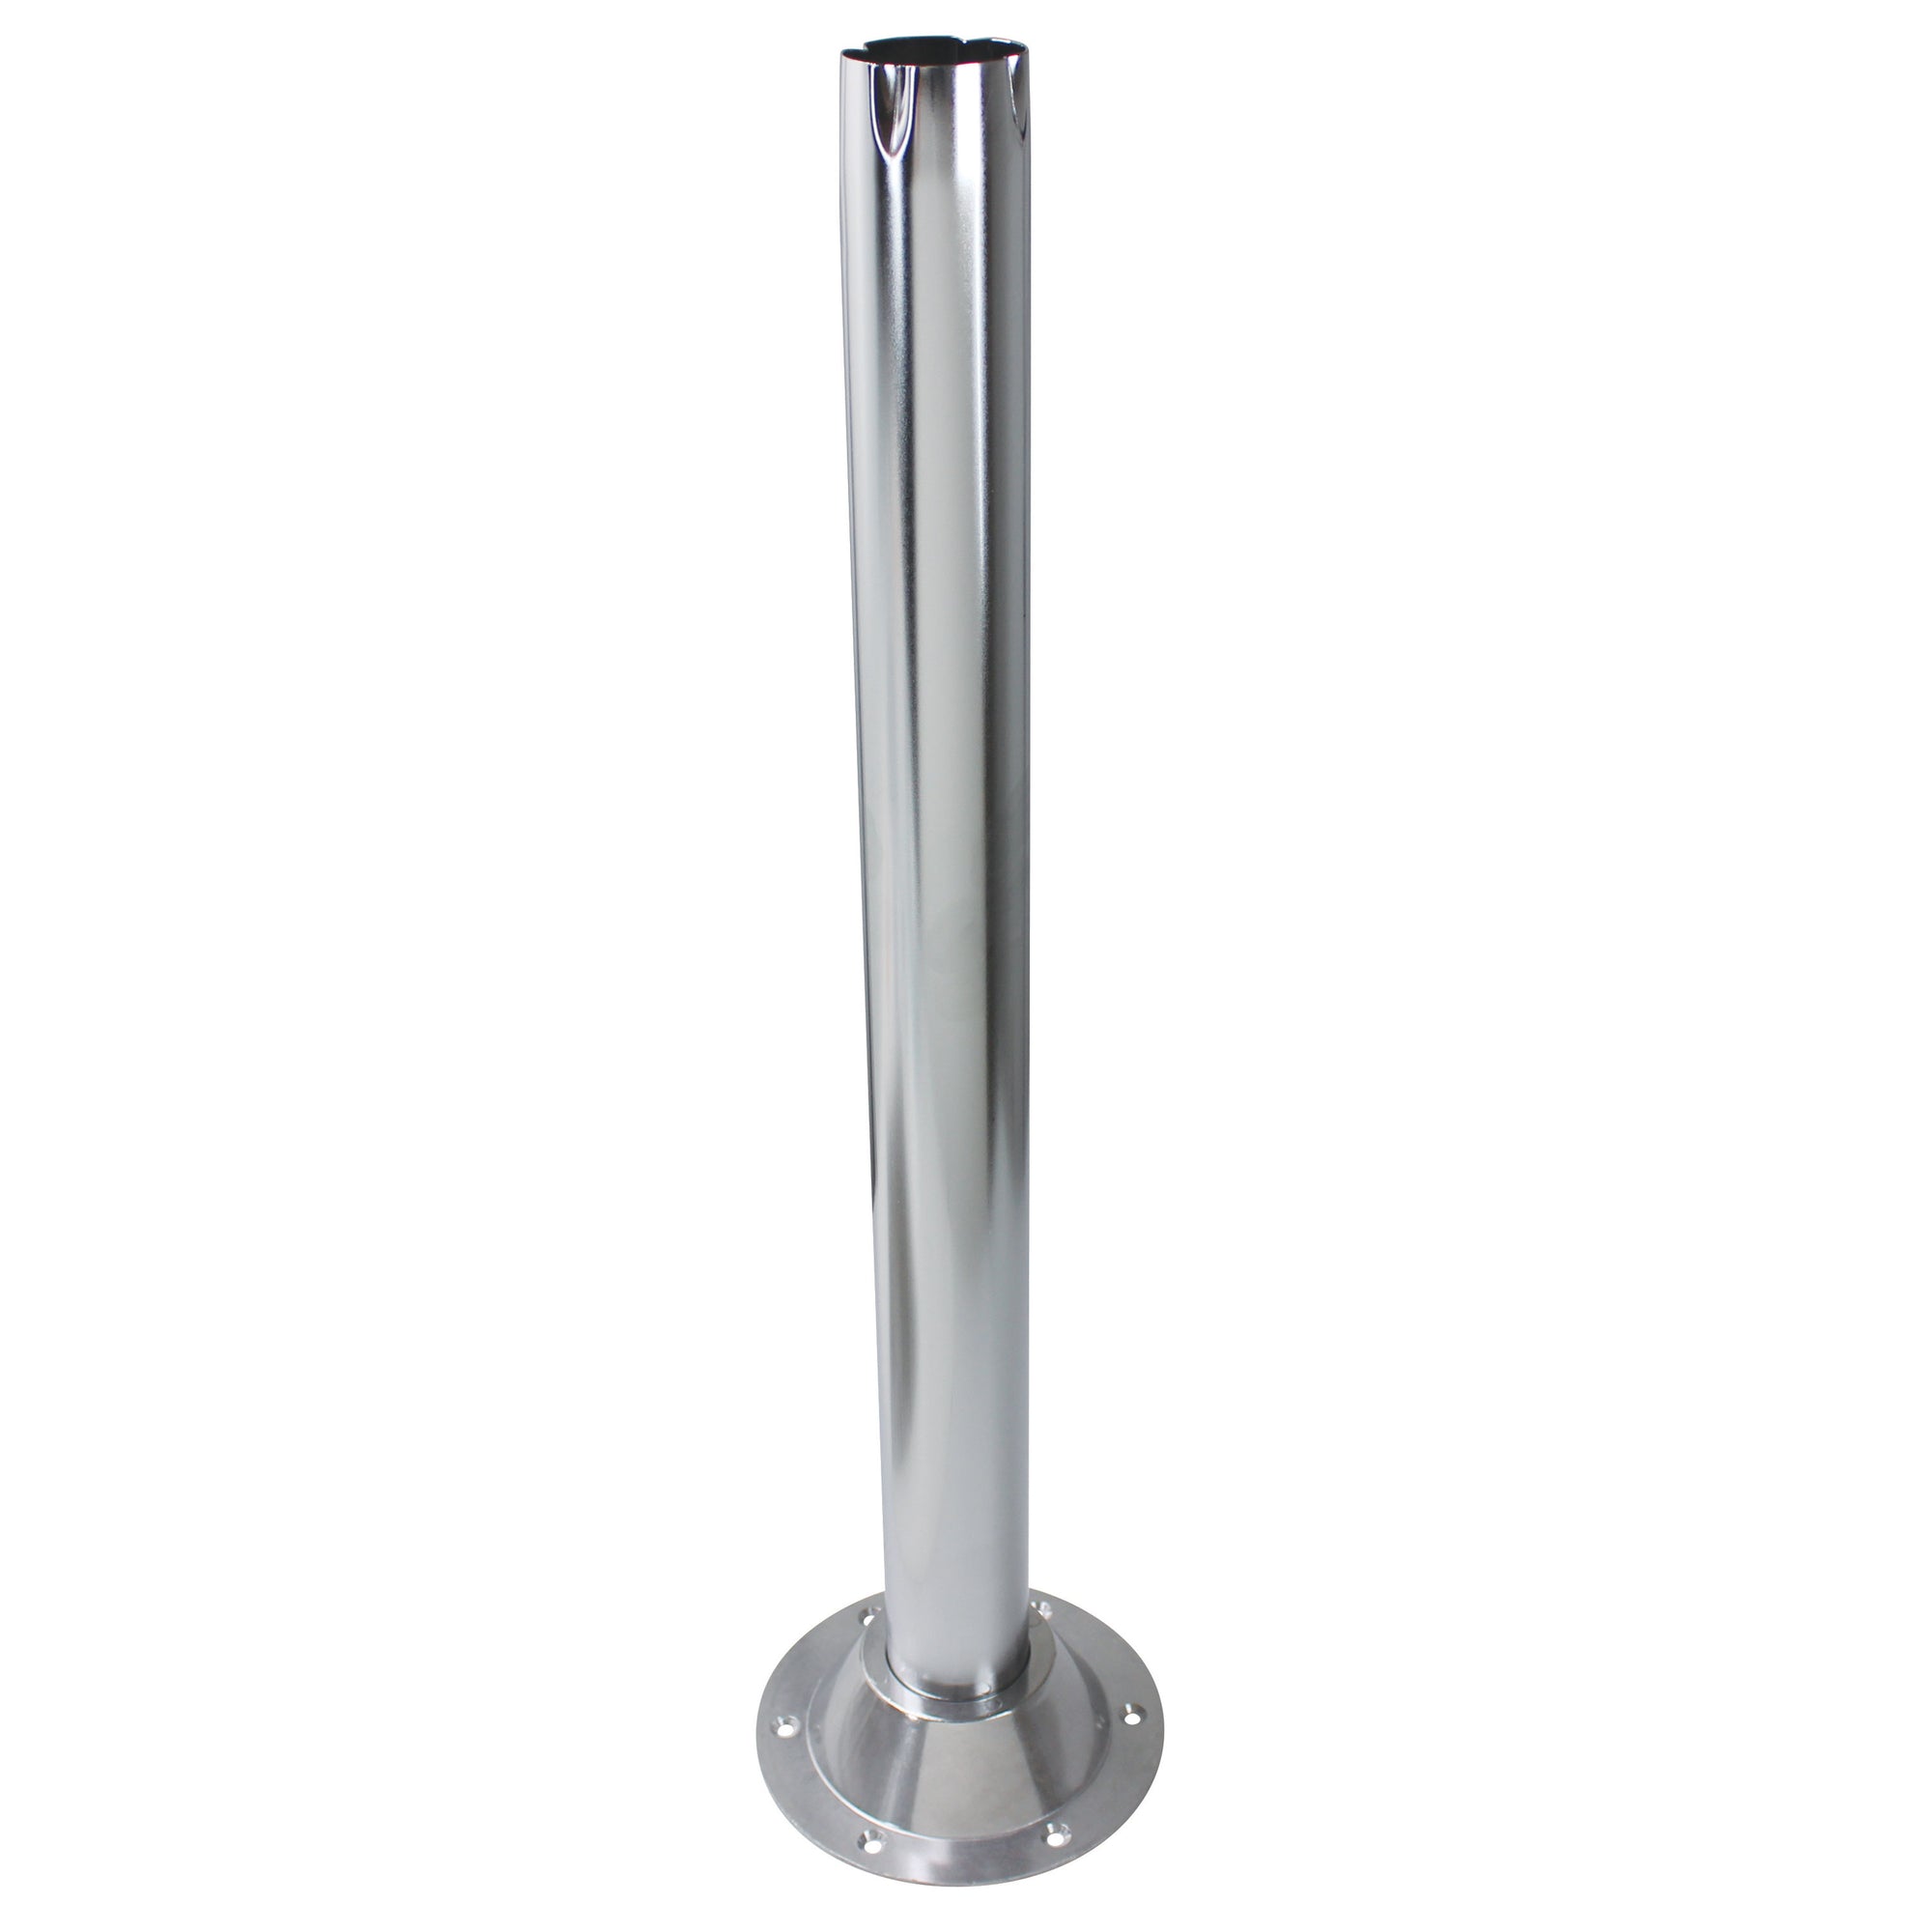 Russell Products MA-1119 Chrome Pedestal Base - Regular